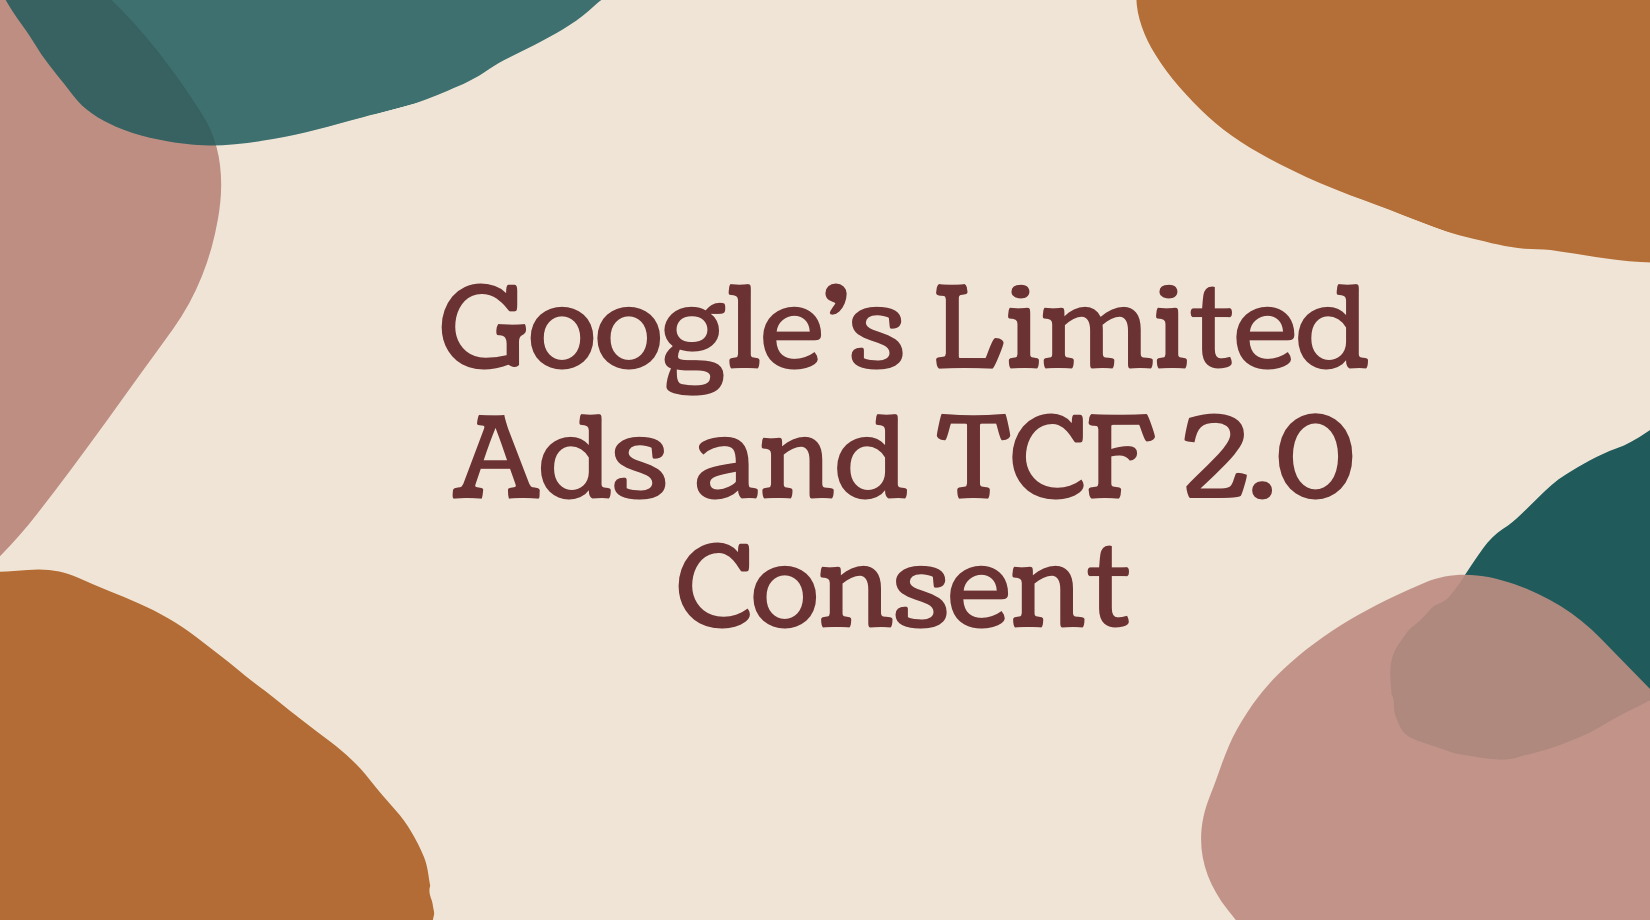 Google's Limited Ads and TCF 2.0 Consent